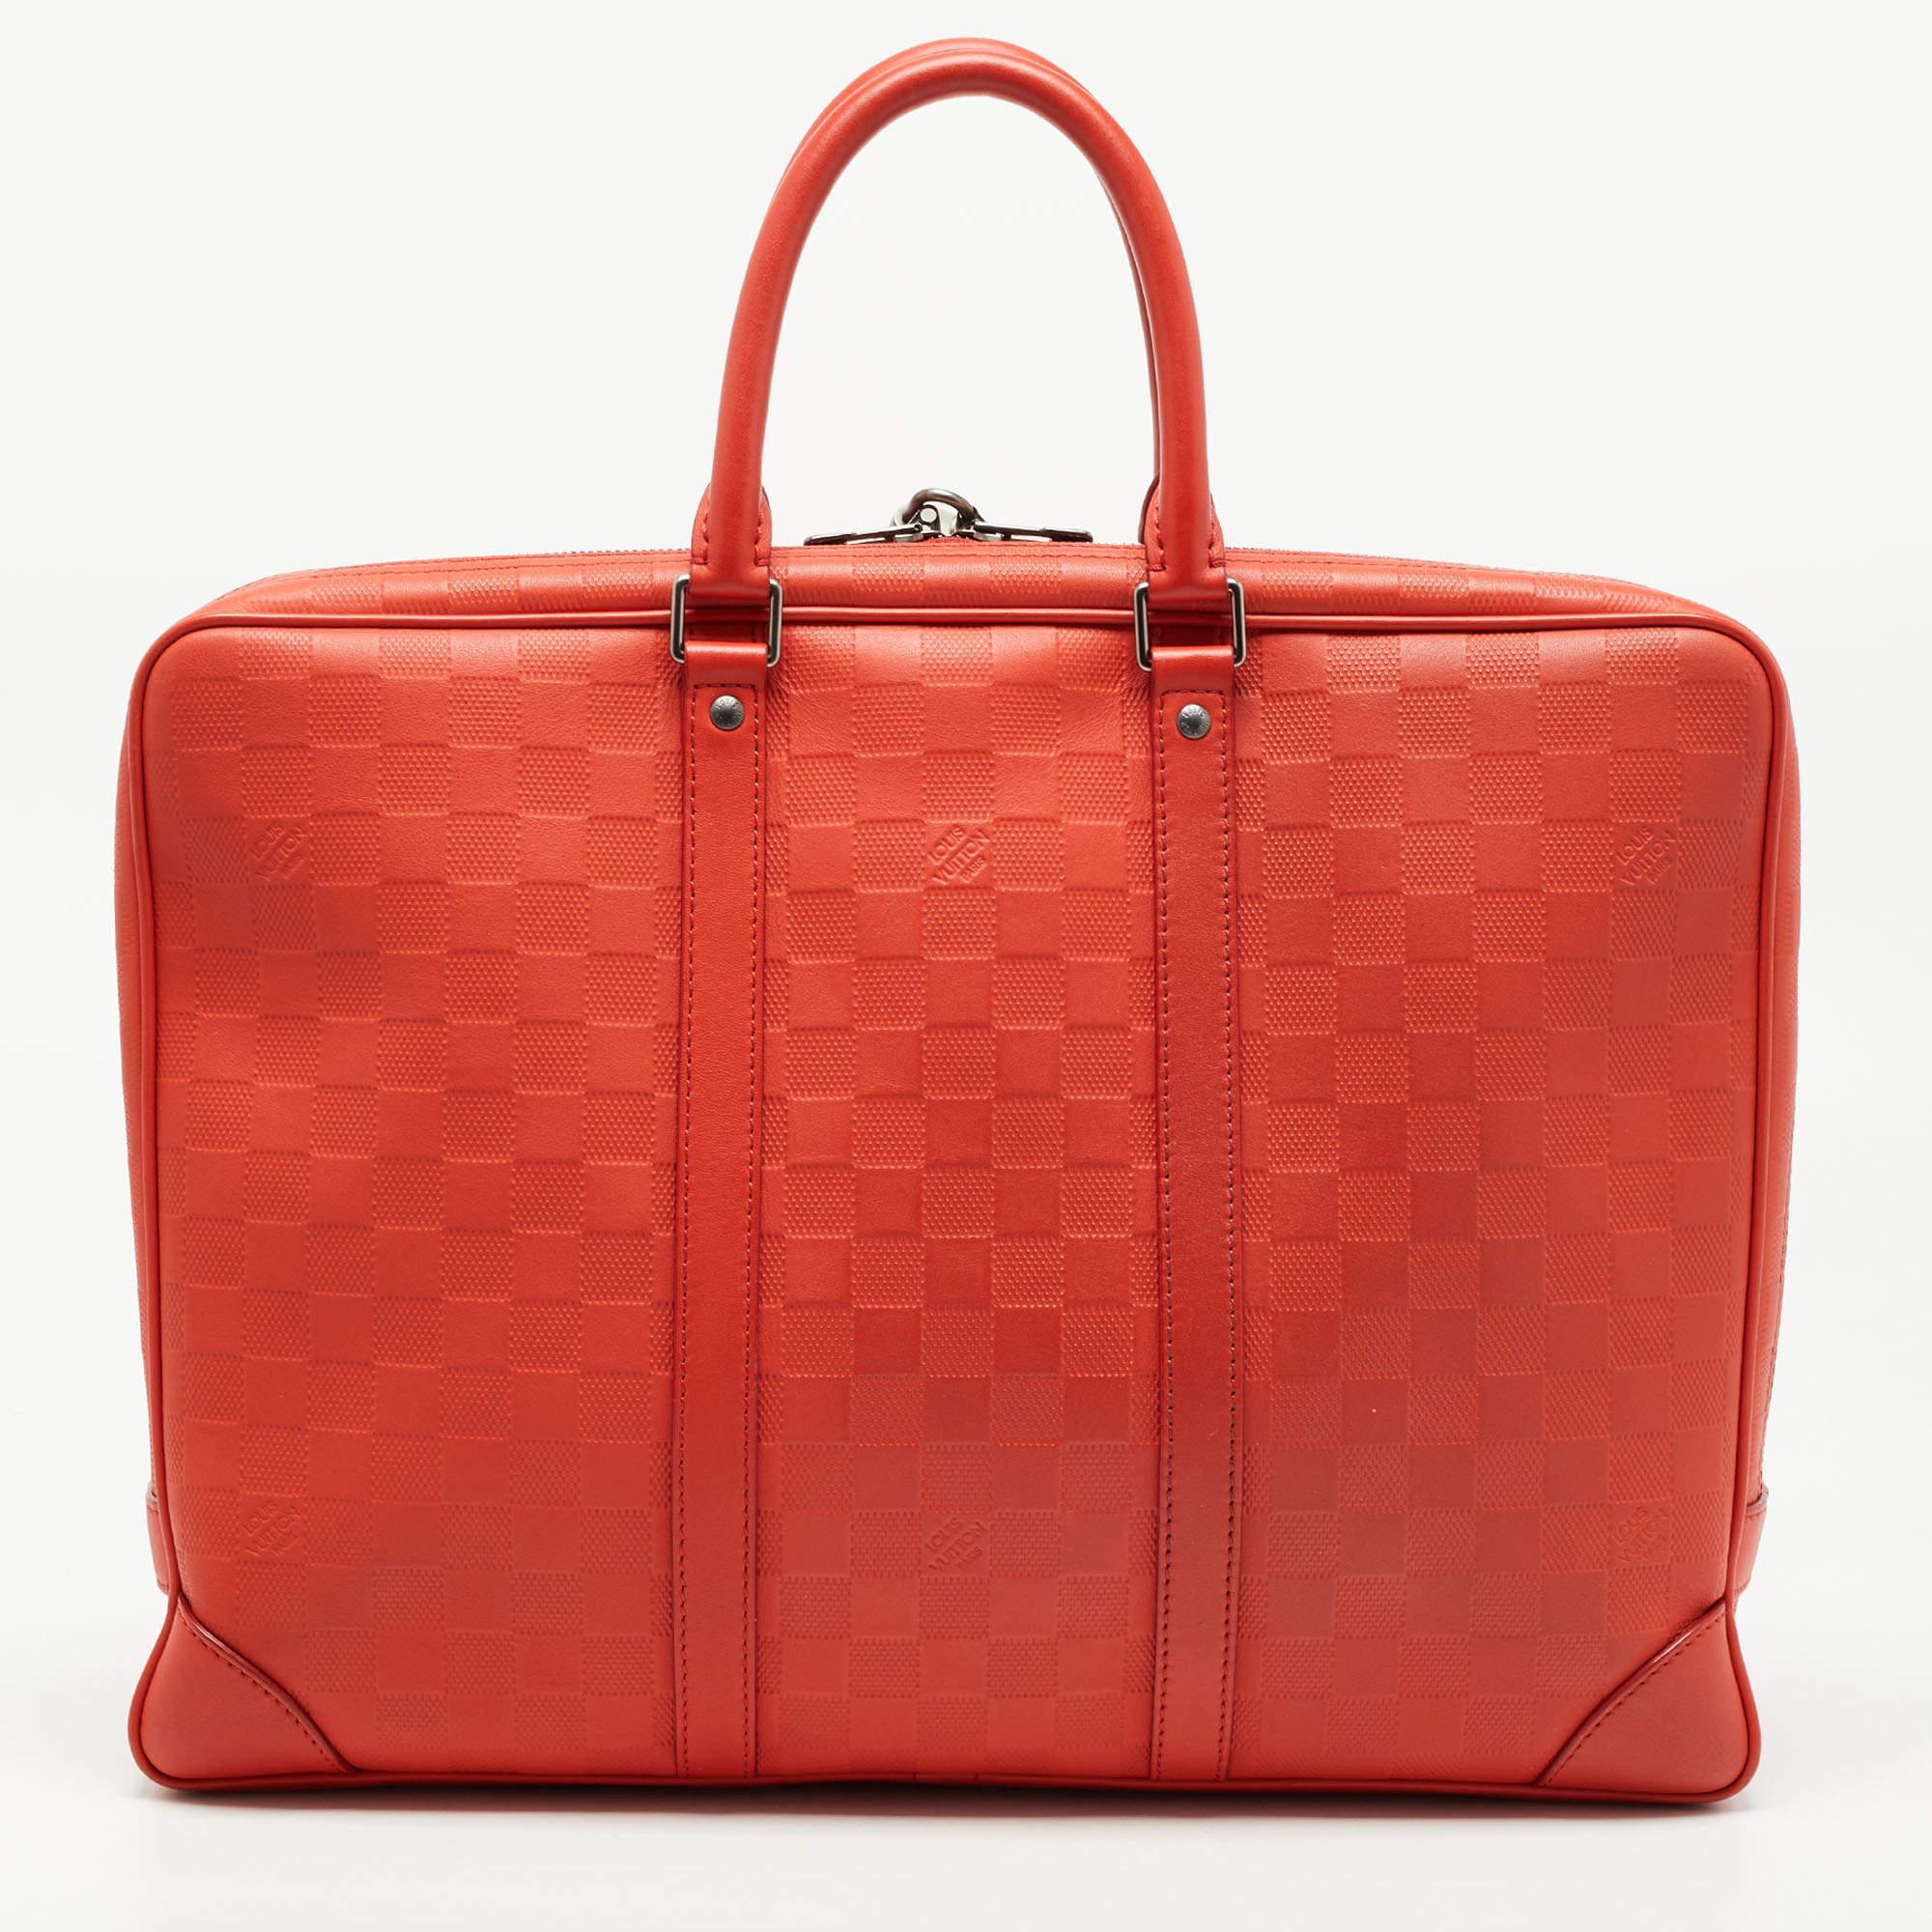 This Porte Documents Voyage briefcase is an ultra-functional choice to carry your essentials! Crafted using Damier Infini leather into a spacious size, the Louis Vuitton briefcase is perfect for frequent use. The top handles, beautiful exterior, and